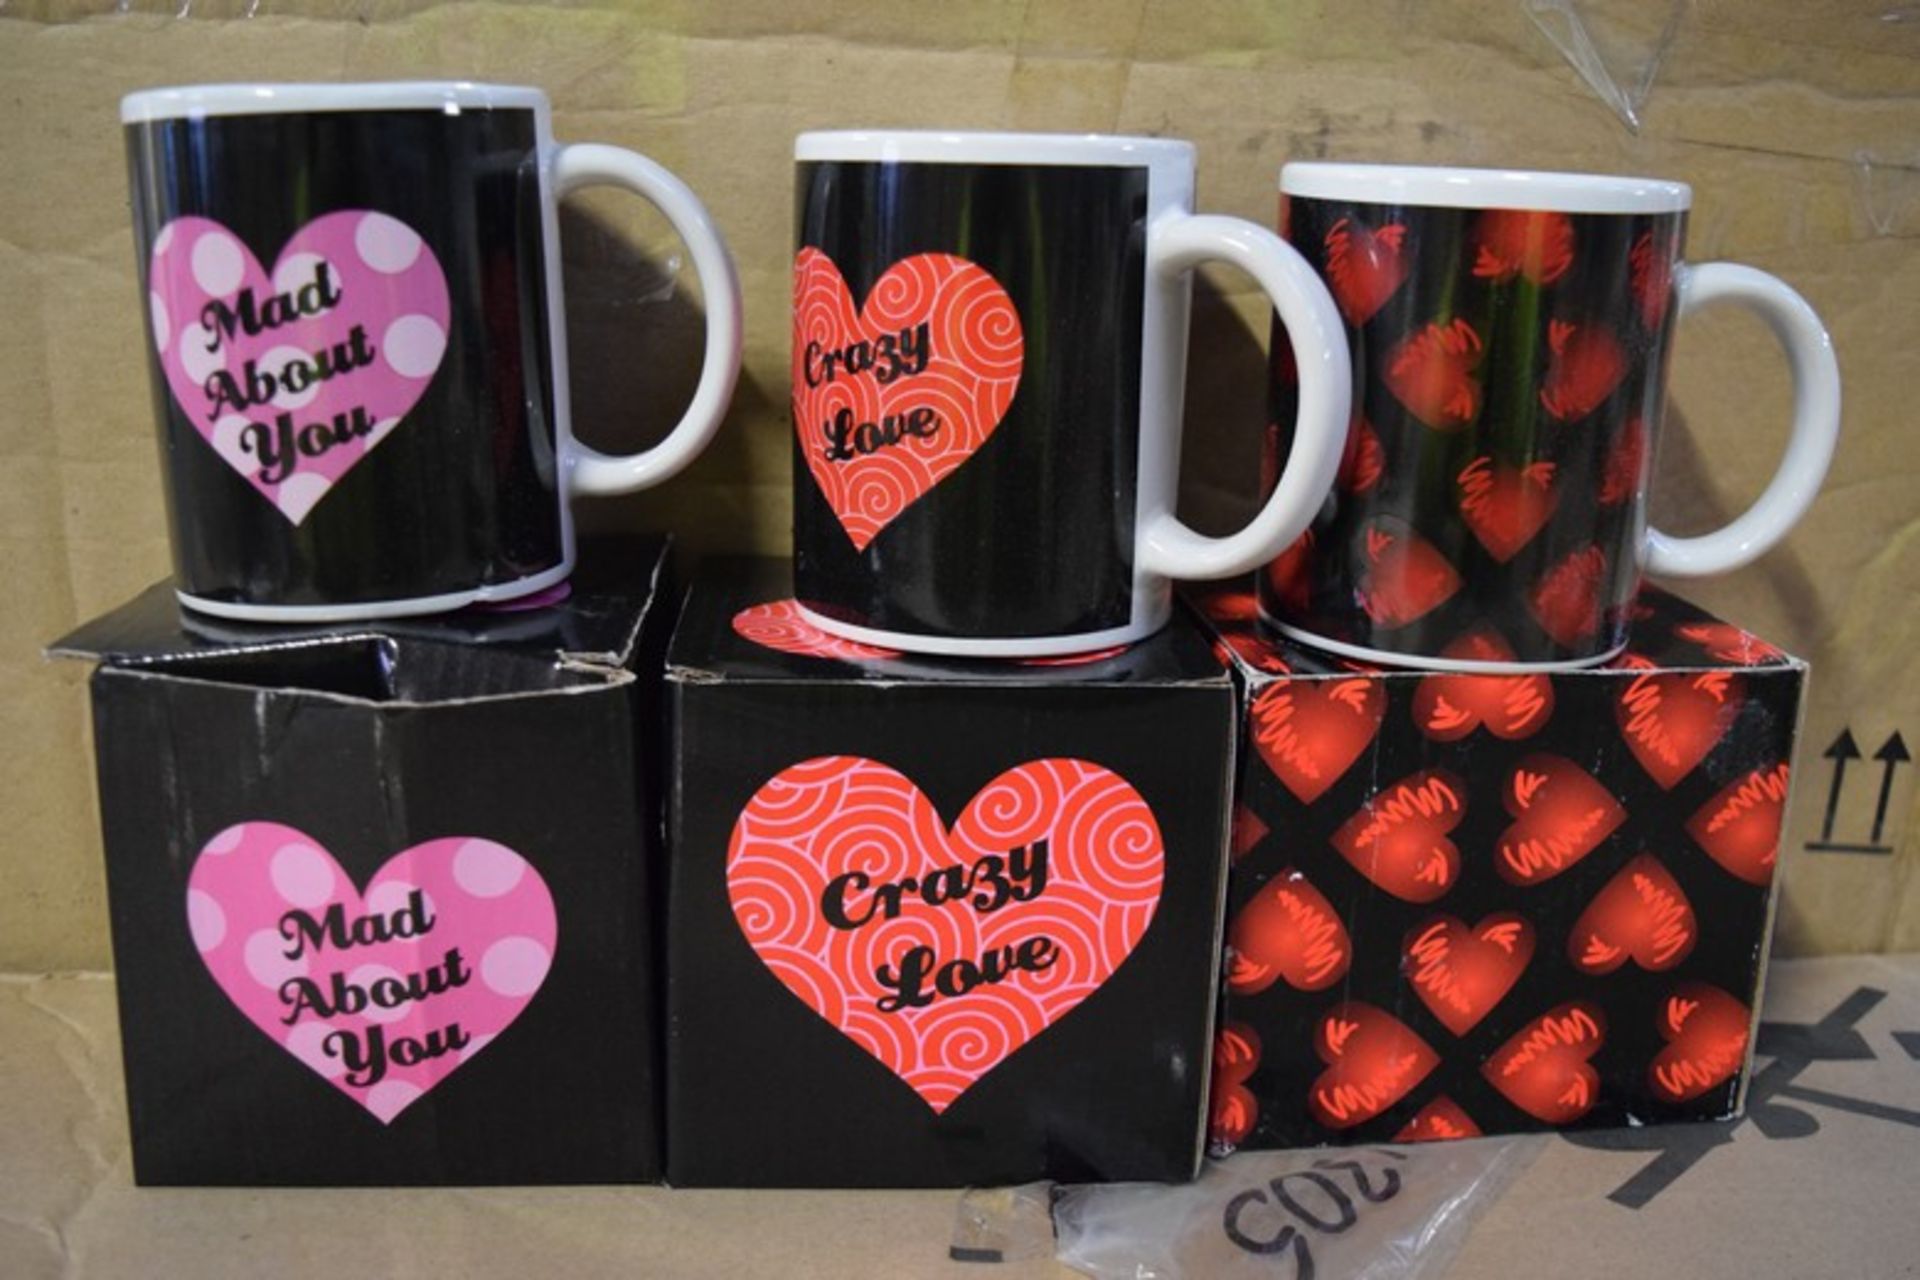 10 x BOXED GIFT TOYS HEART PRINT MUGS COMBINED RRP £100 *PLEASE NOTE THAT THE BID PRICE IS